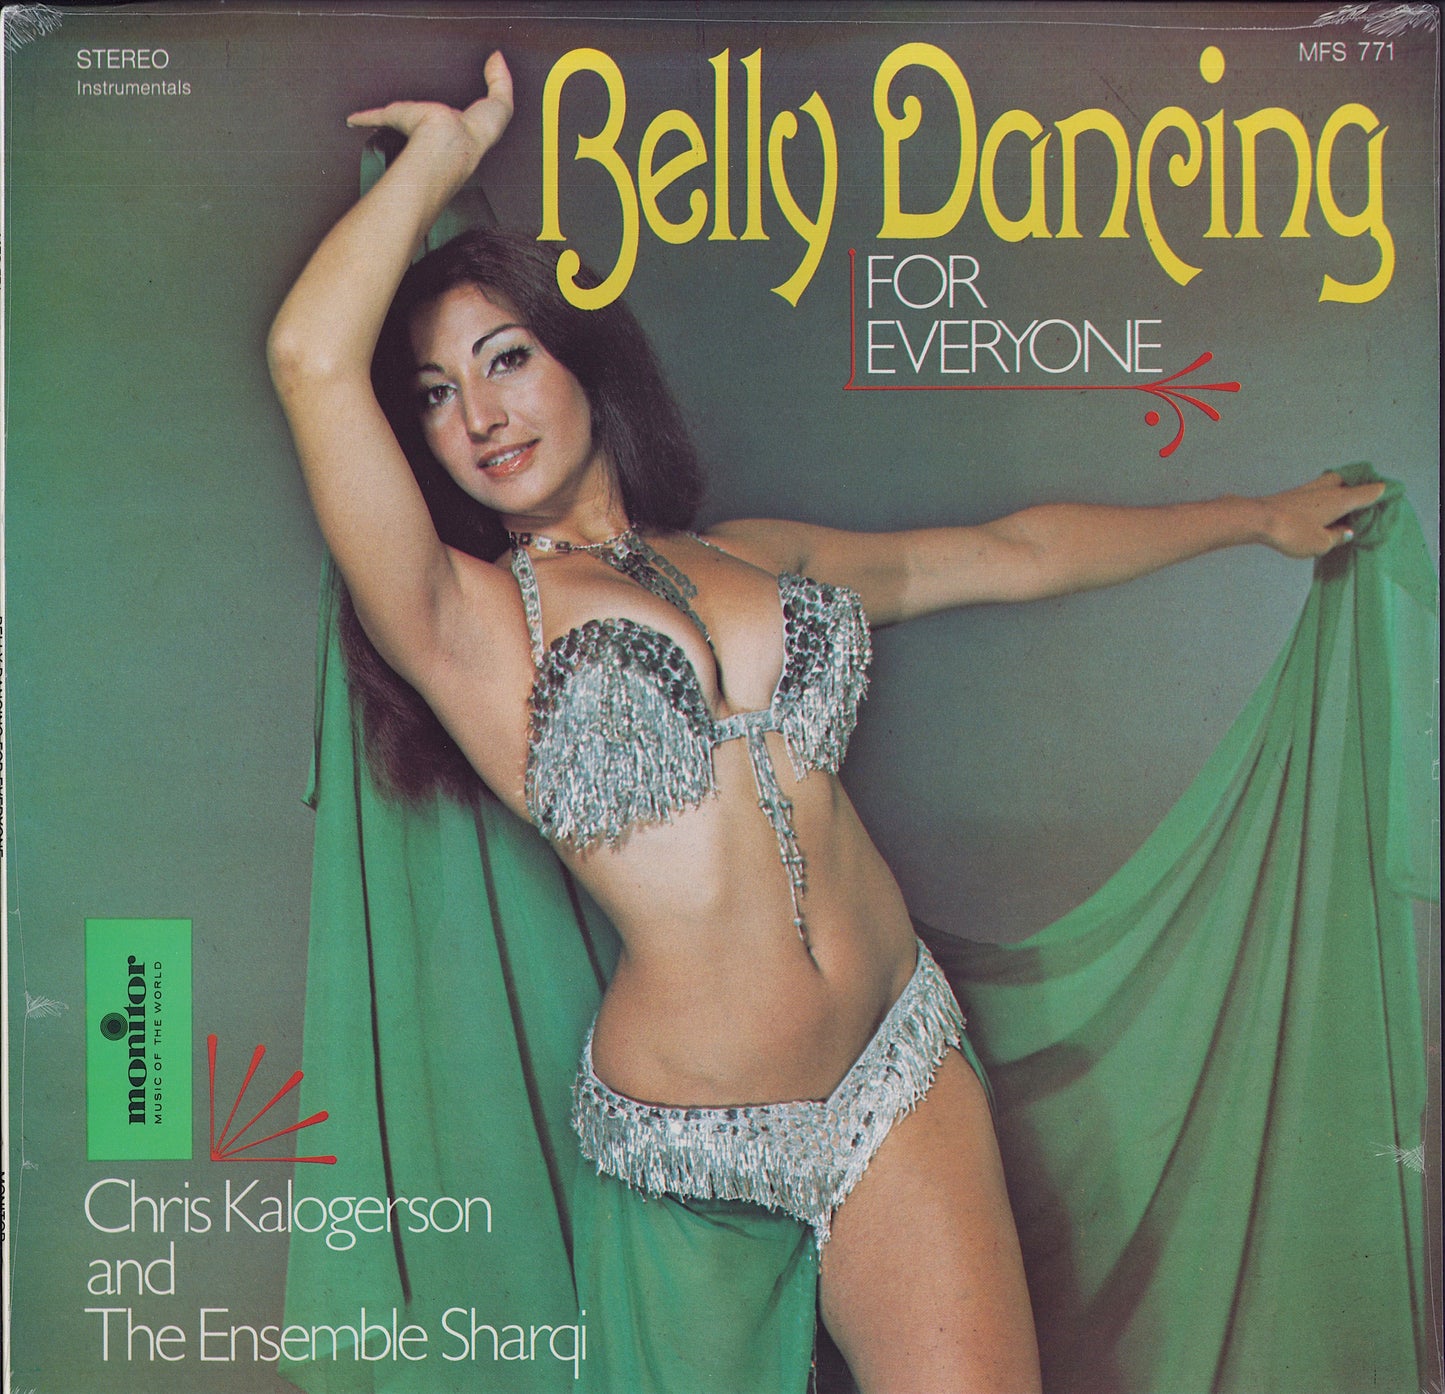 Chris Kalogerson and The Ensemble Sharqi ‎- Belly Dancing For Everyone Vinyl LP